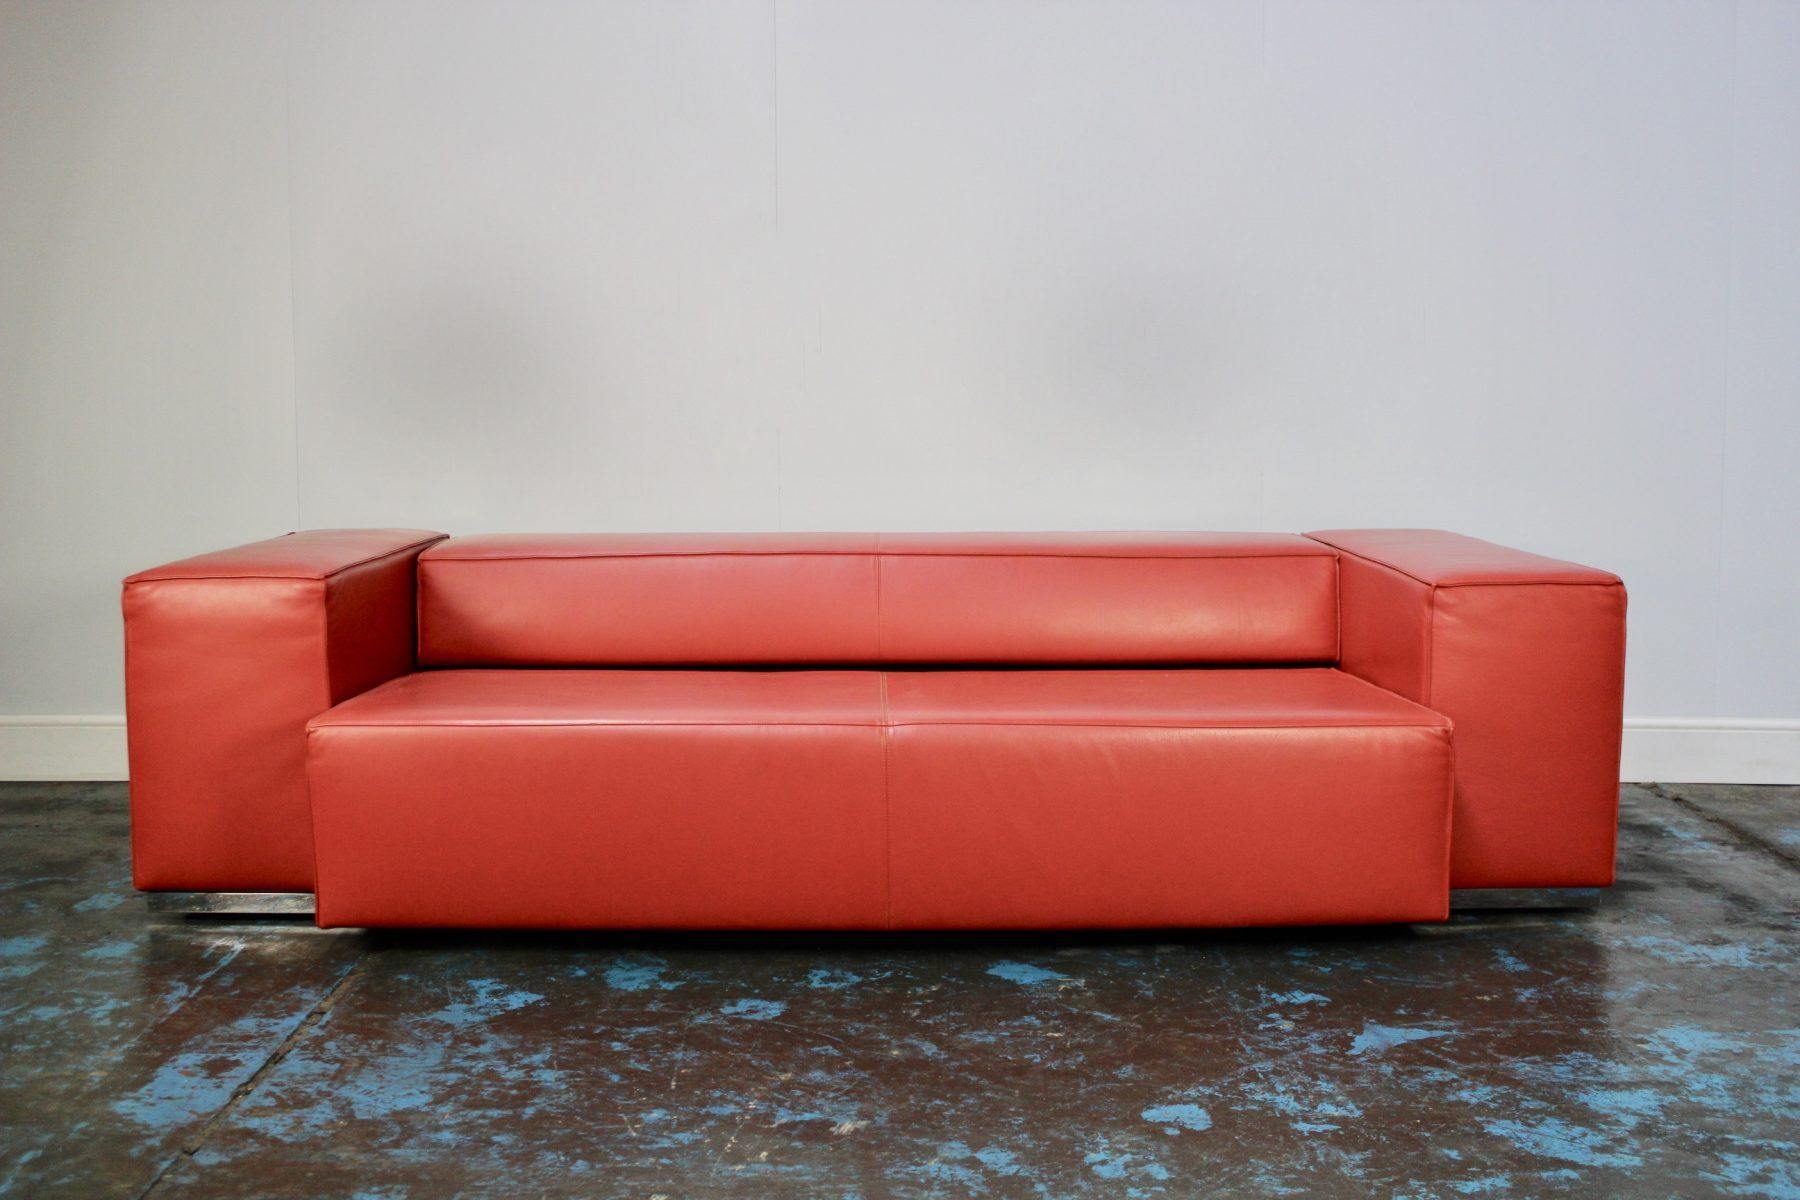 Cassina “Big Blox” 3-Seat Sofa Bed in Deep Red Leather 1